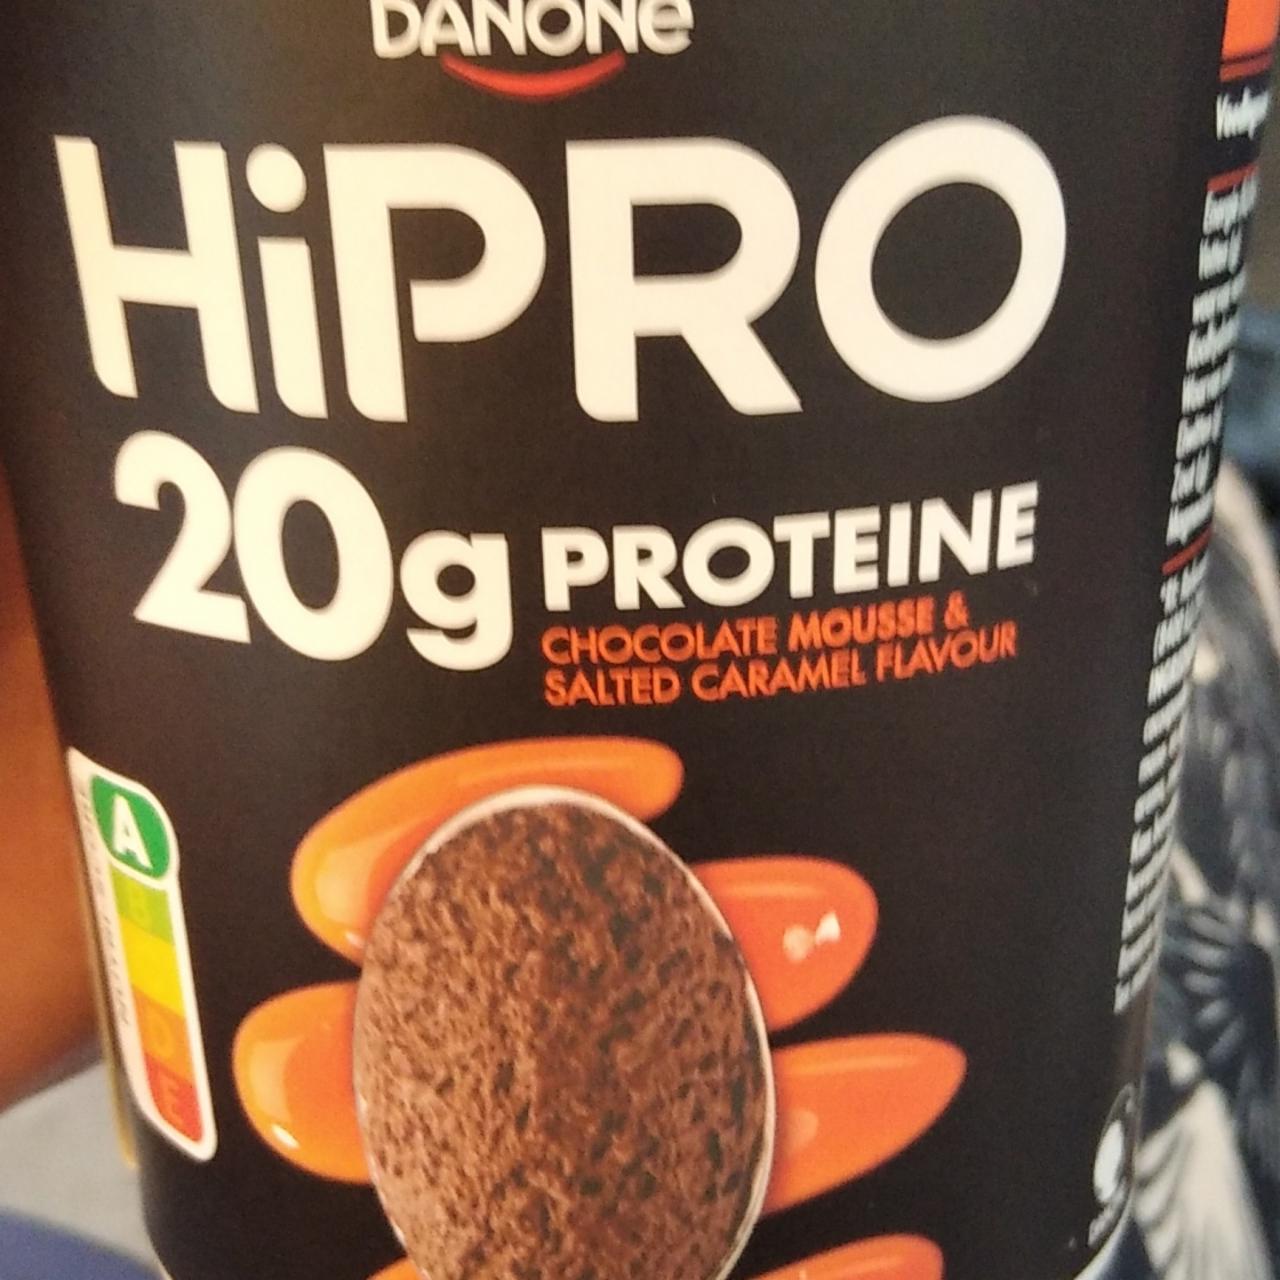 Fotografie - HiPRO 20g Proteine Chocolate mousse & salted caramel Danone